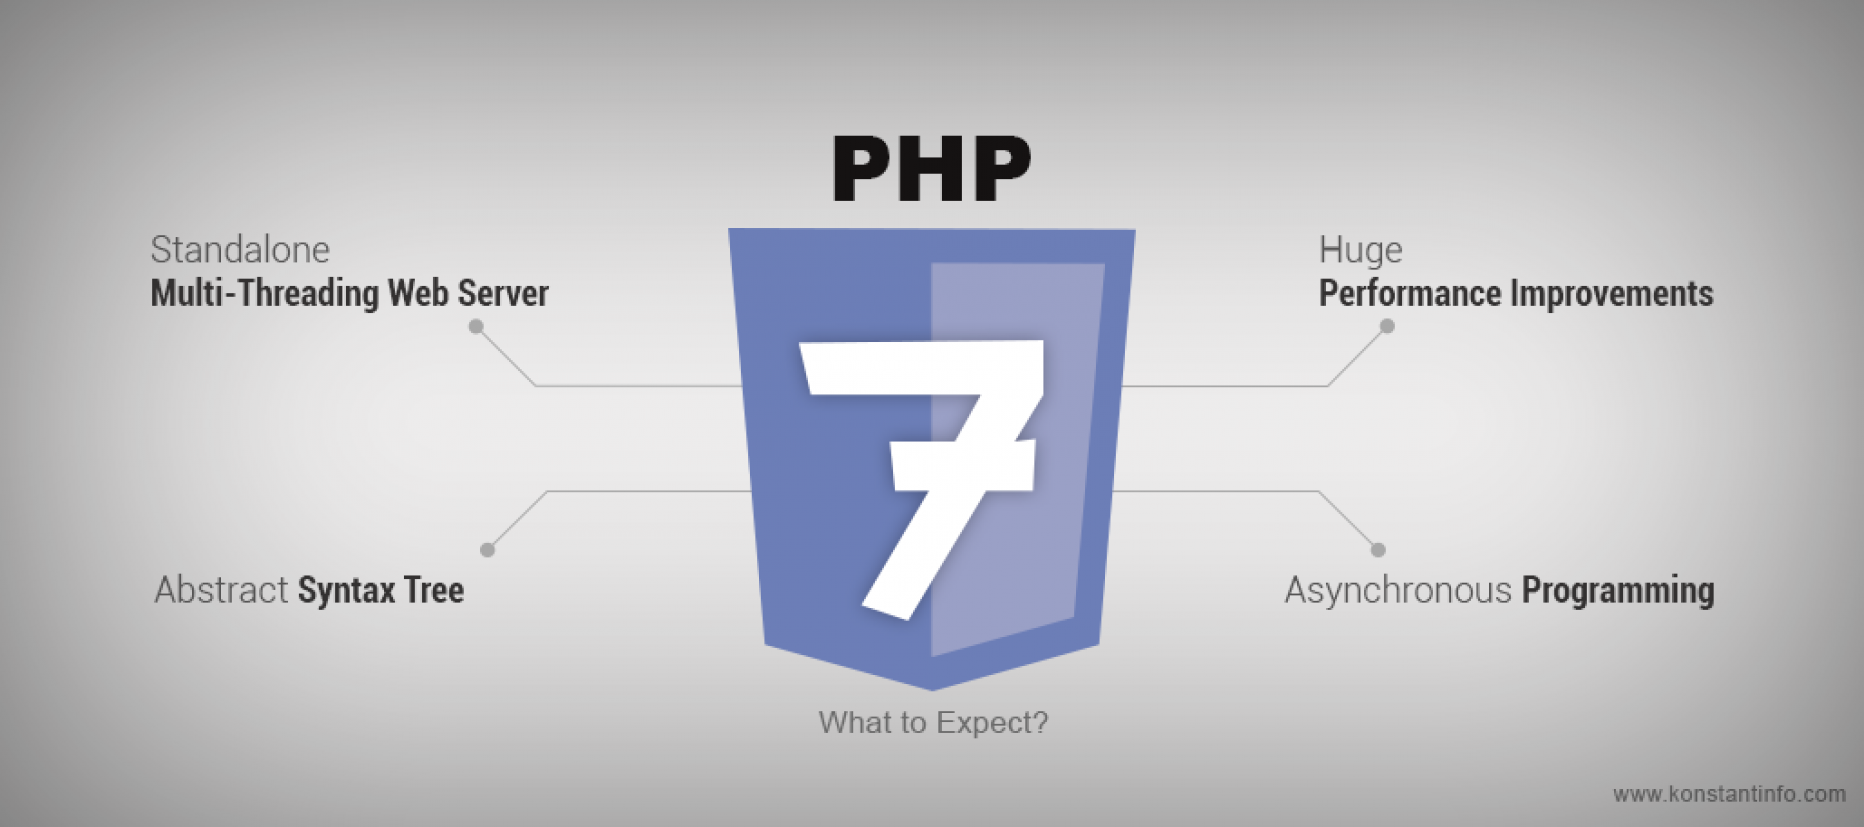 Php 7.0. Php. Php 7. Php картинка. Значок php.